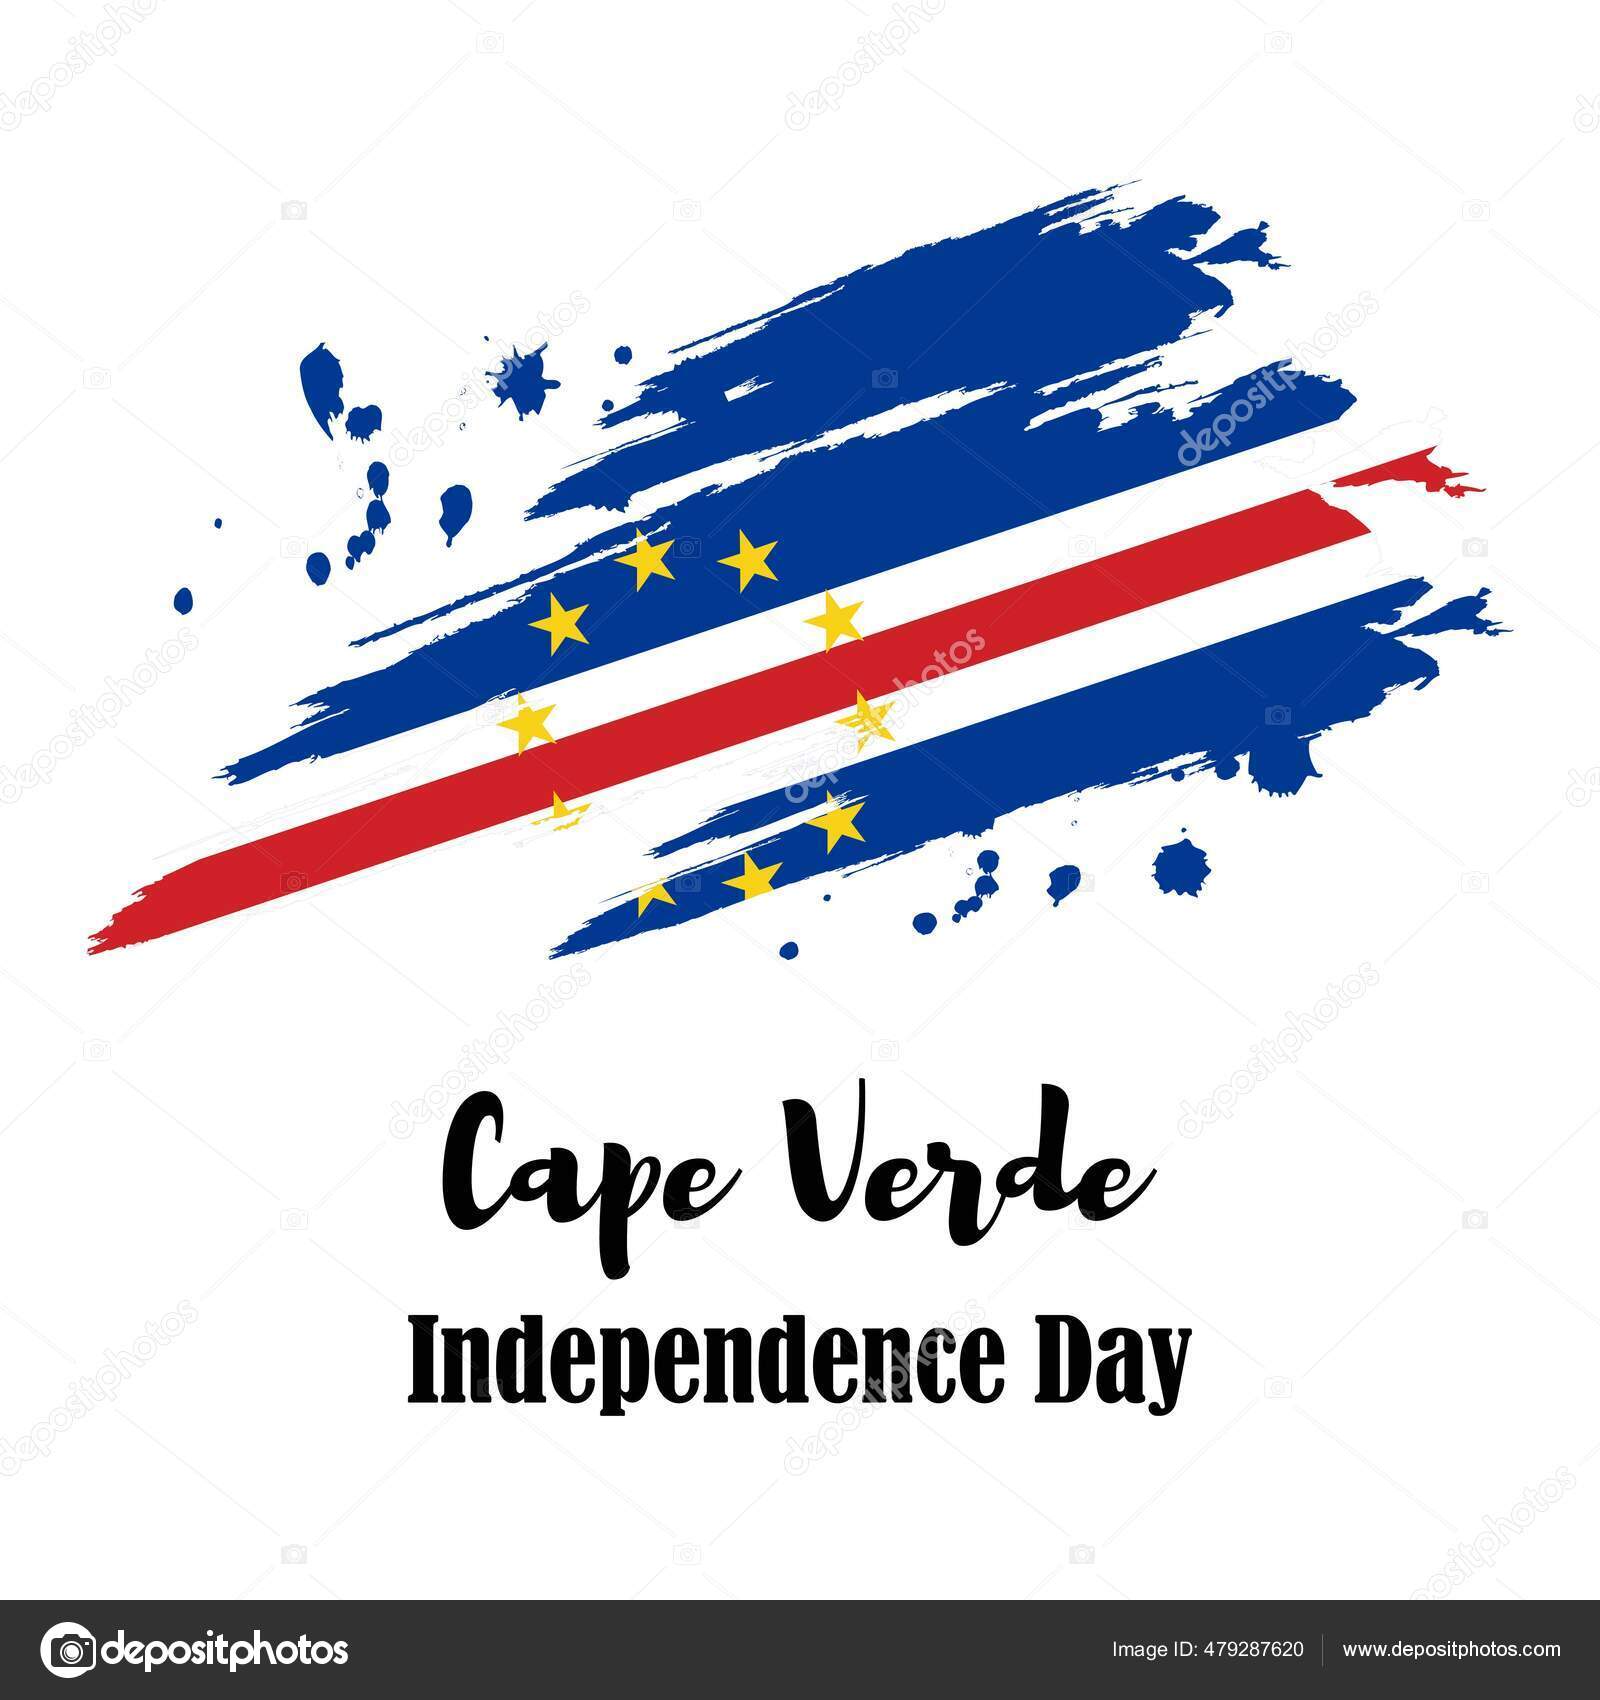 Independence Day in Cape Verde in 2024